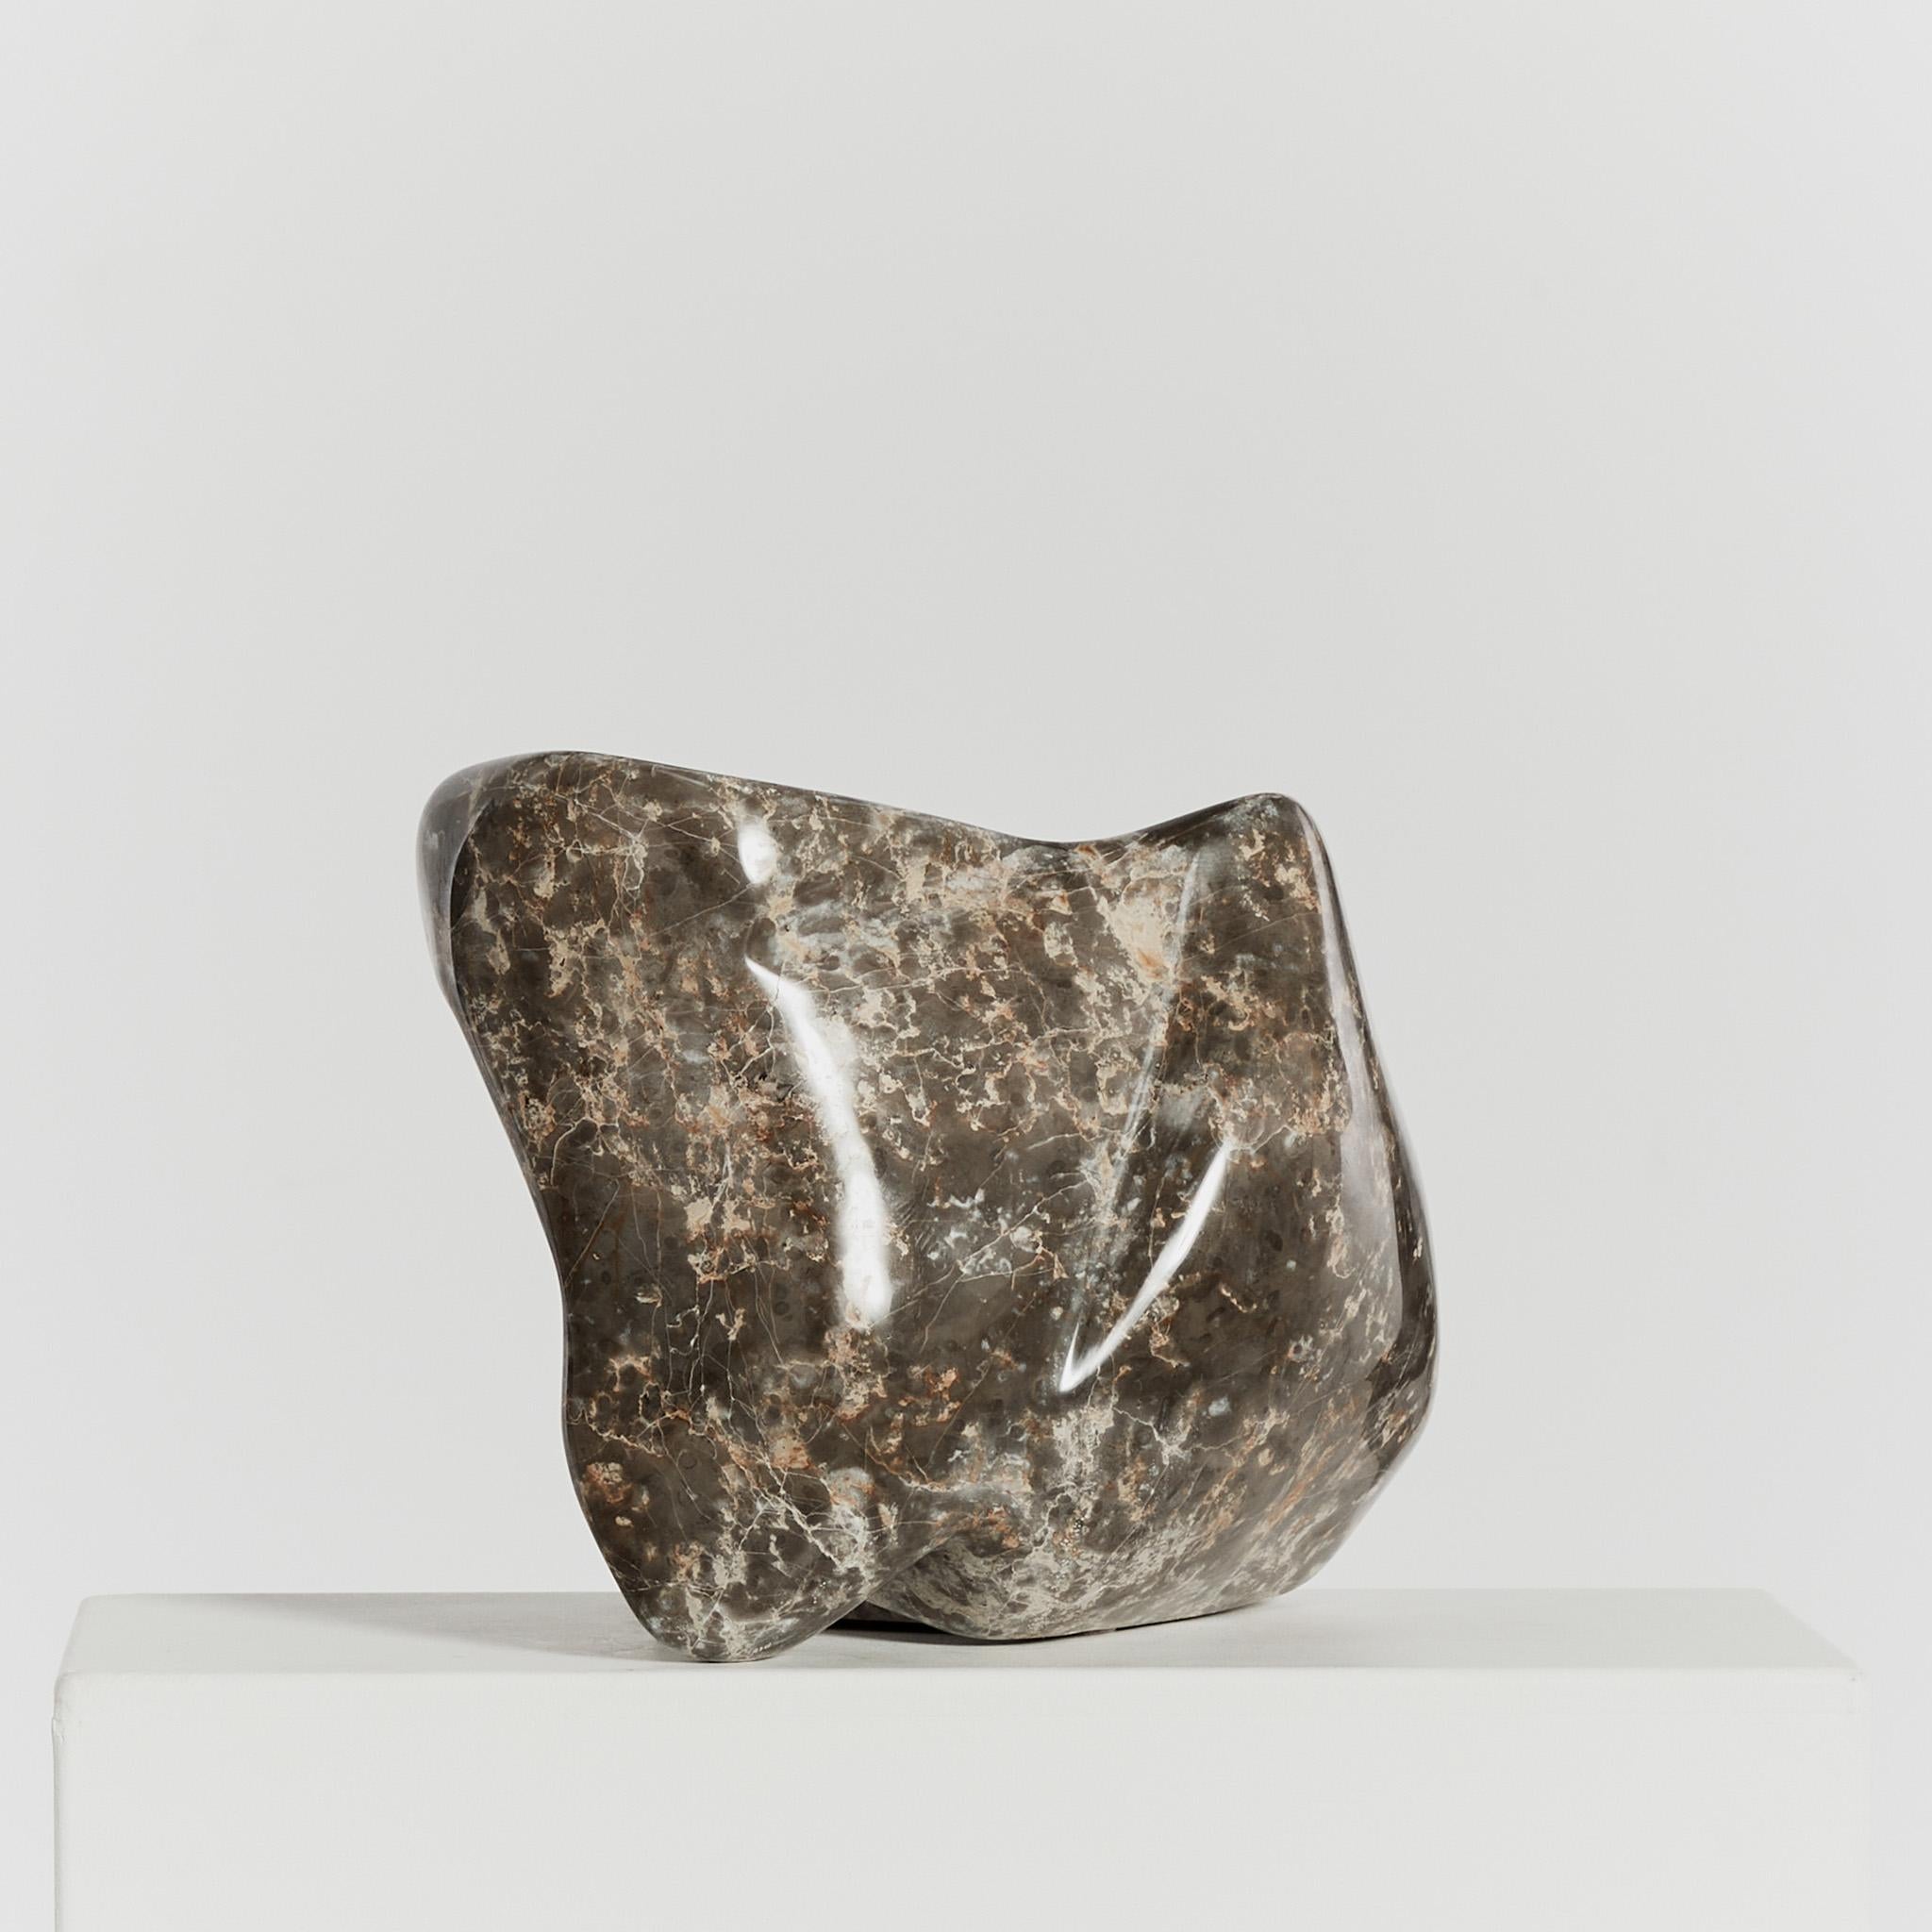 A hand carved abstract sculpture in Mokra limestone, signed by the late sculptor Michel Hoppe (1939-2002). The significantly proportioned balancing freeform piece features textural stippled detail and a contrasting velvety polished finish.